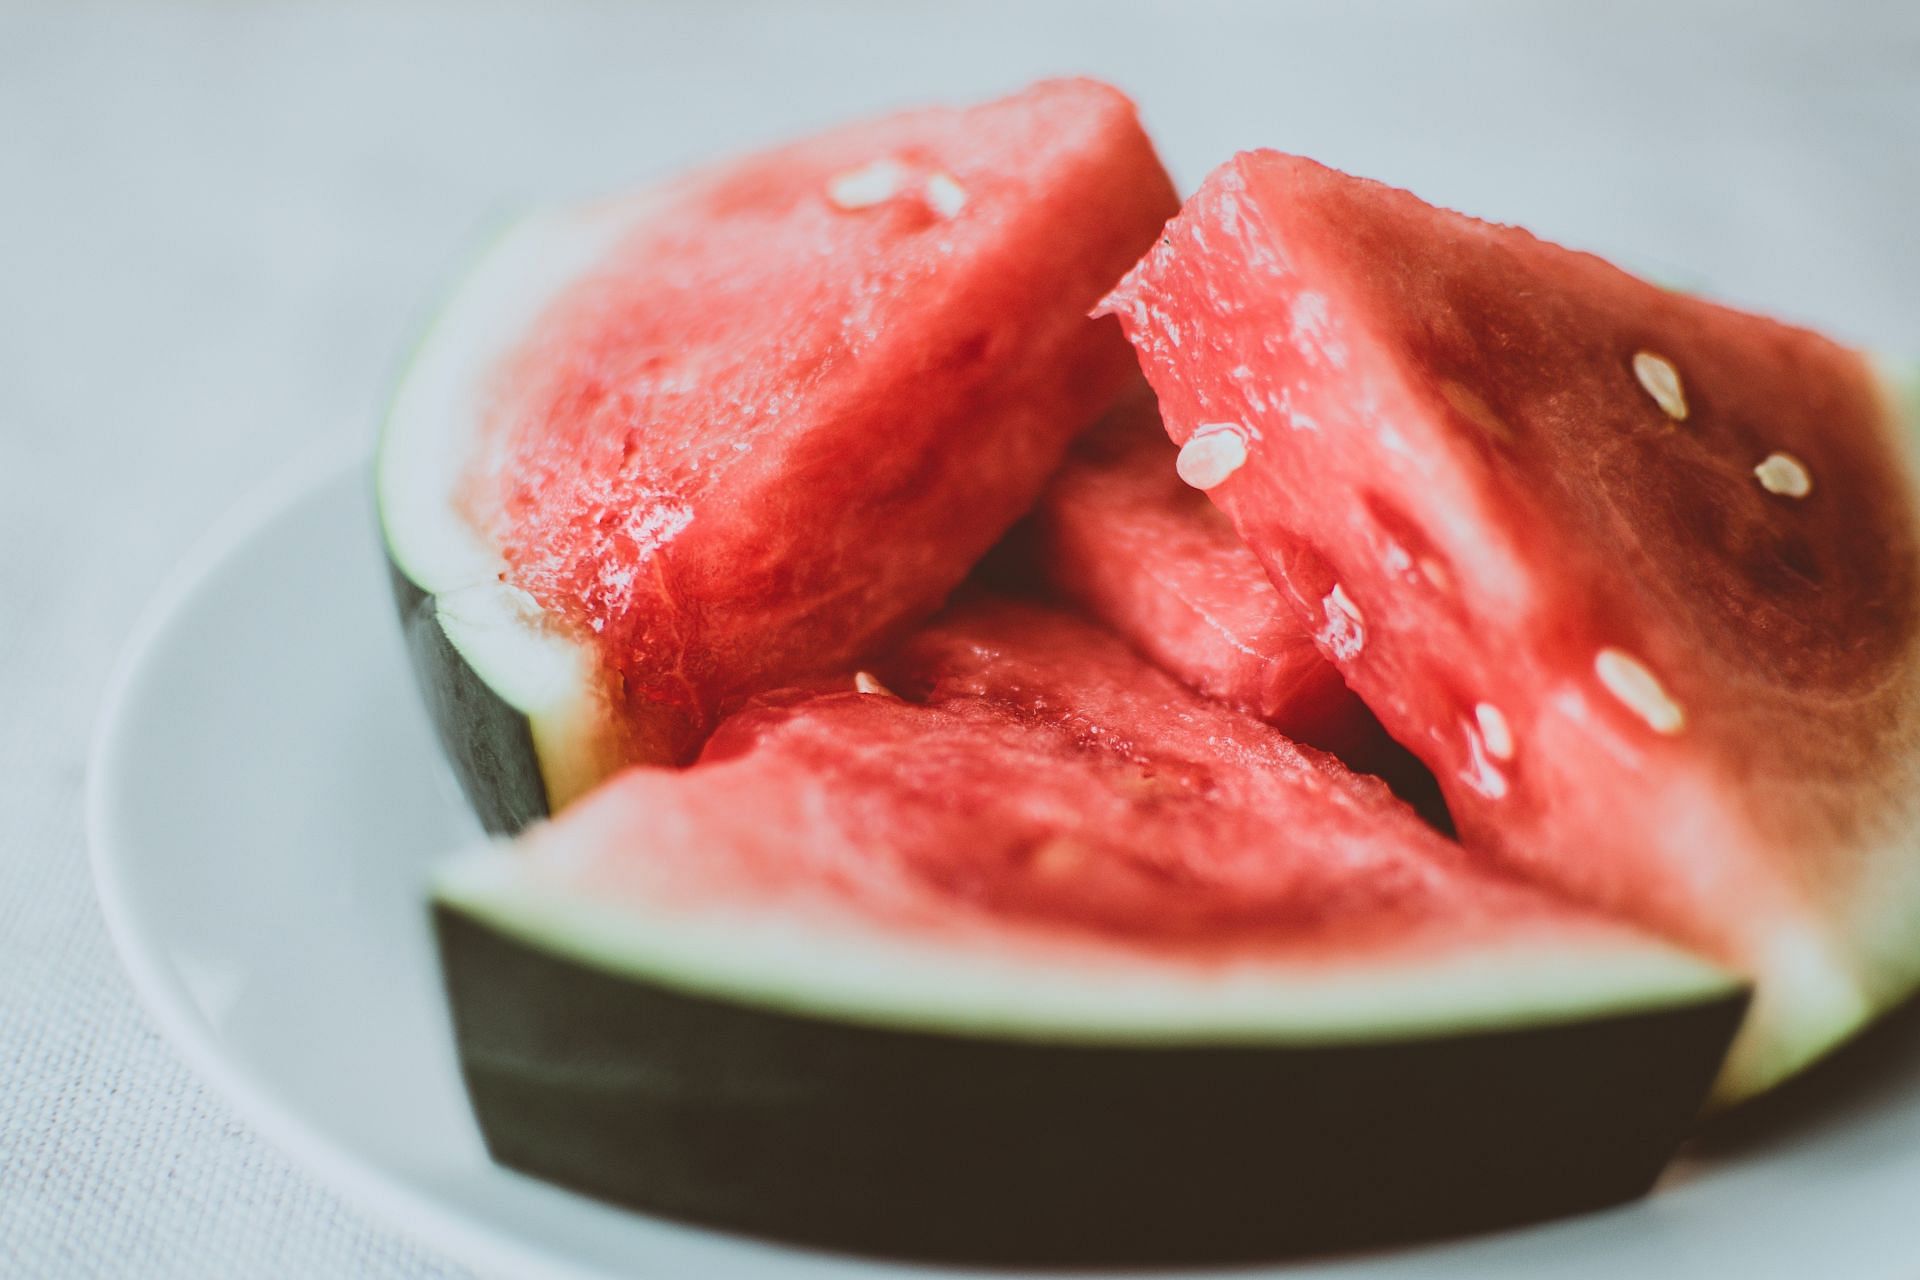 Watermelons as one of the best fat burning fruits (image sourced via Pexels / Photo by Lisa)